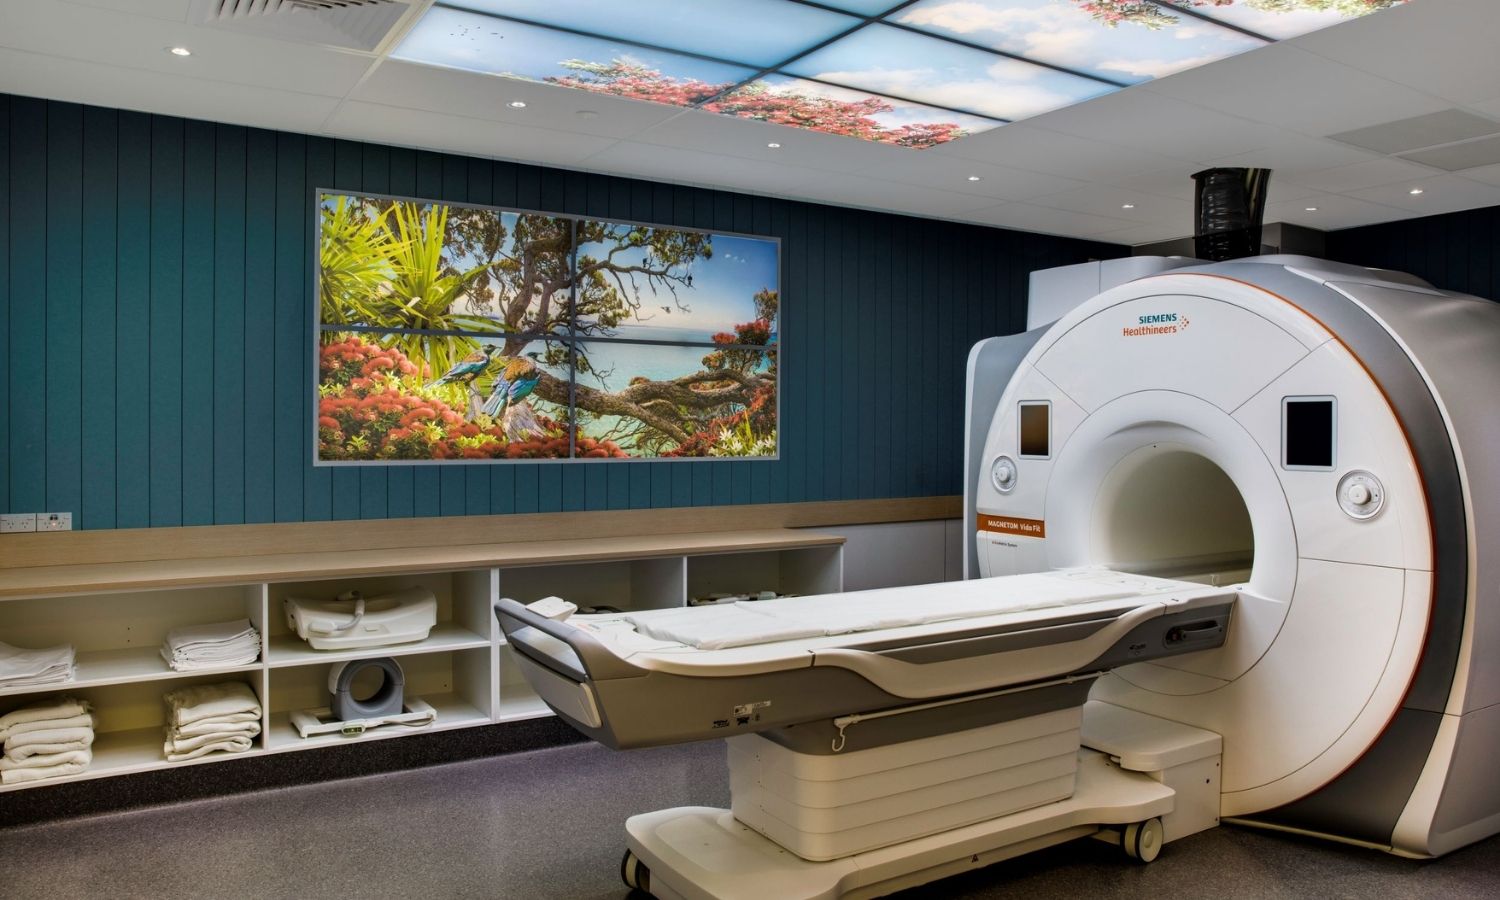 Scanner upgrade advances MRI imaging capabilities at the